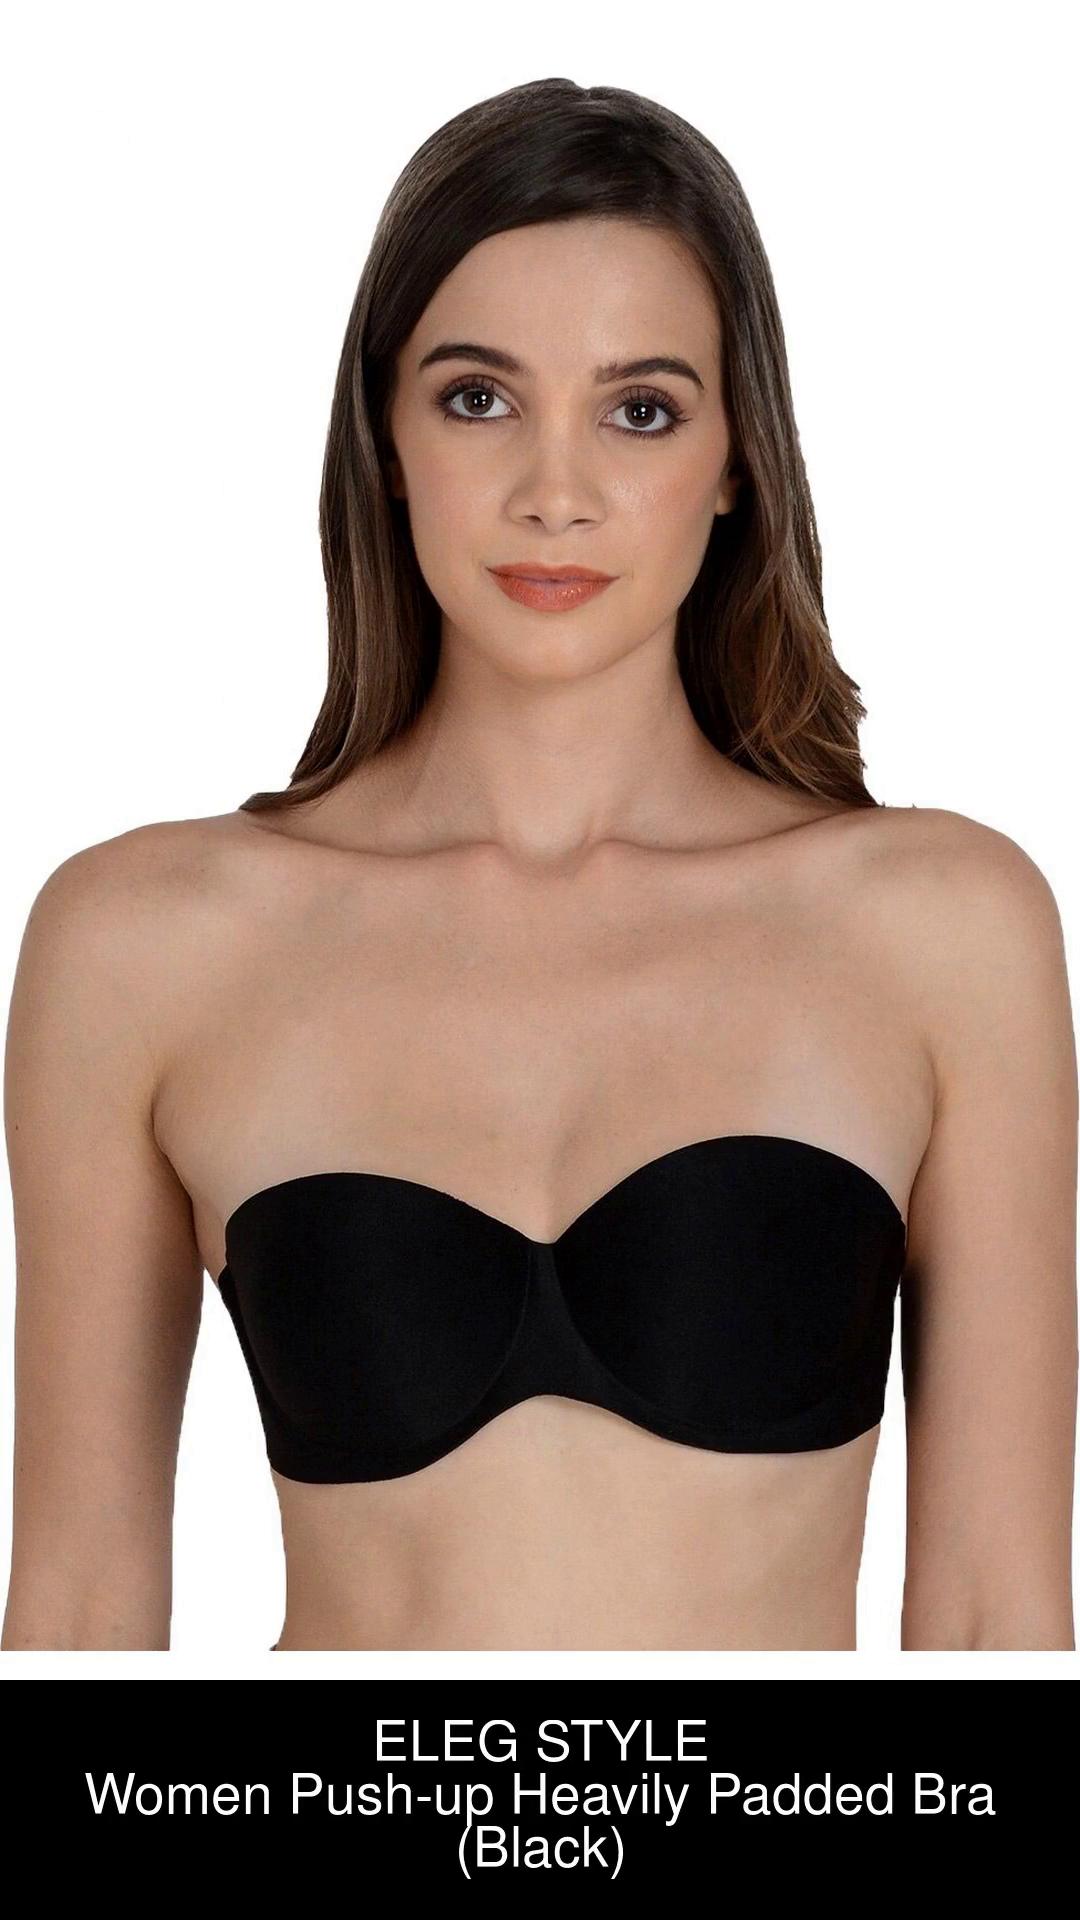 ELEG STYLE Women Push-up Heavily Padded Bra - Buy ELEG STYLE Women Push-up  Heavily Padded Bra Online at Best Prices in India